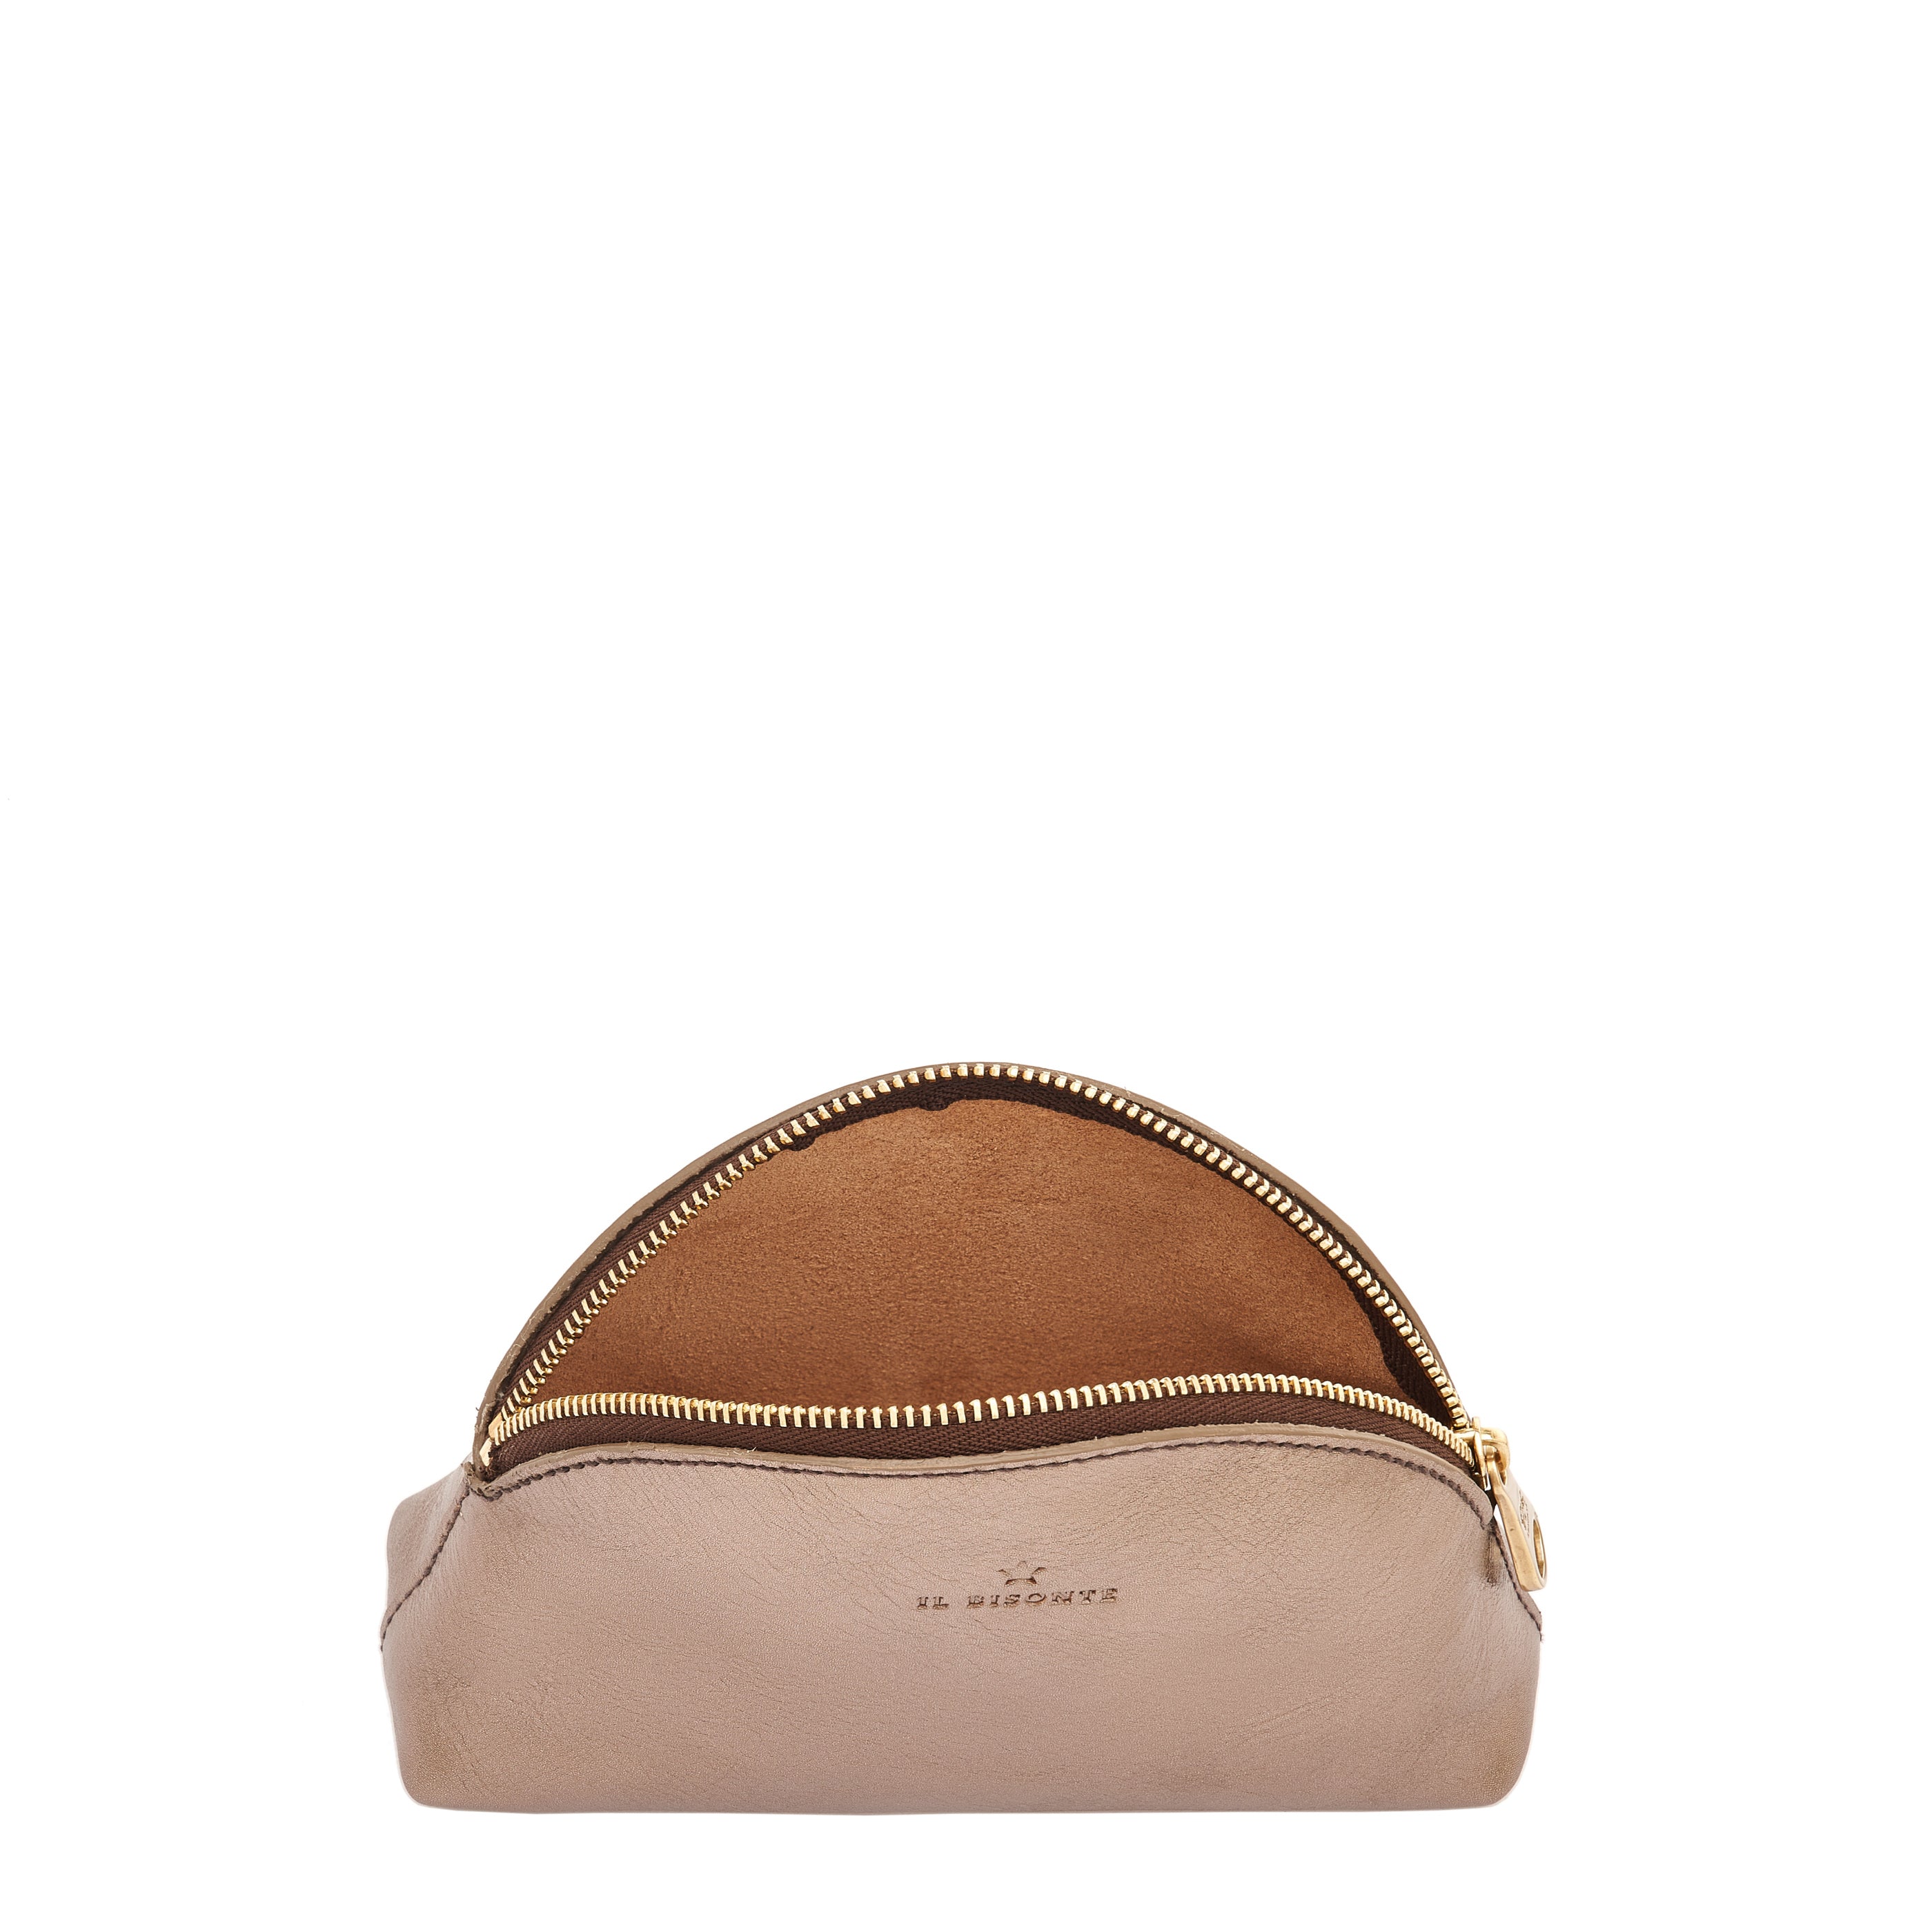 Buy Oriflame Dune Purse L:21 x W:1.5 x H:11 cm at Amazon.in